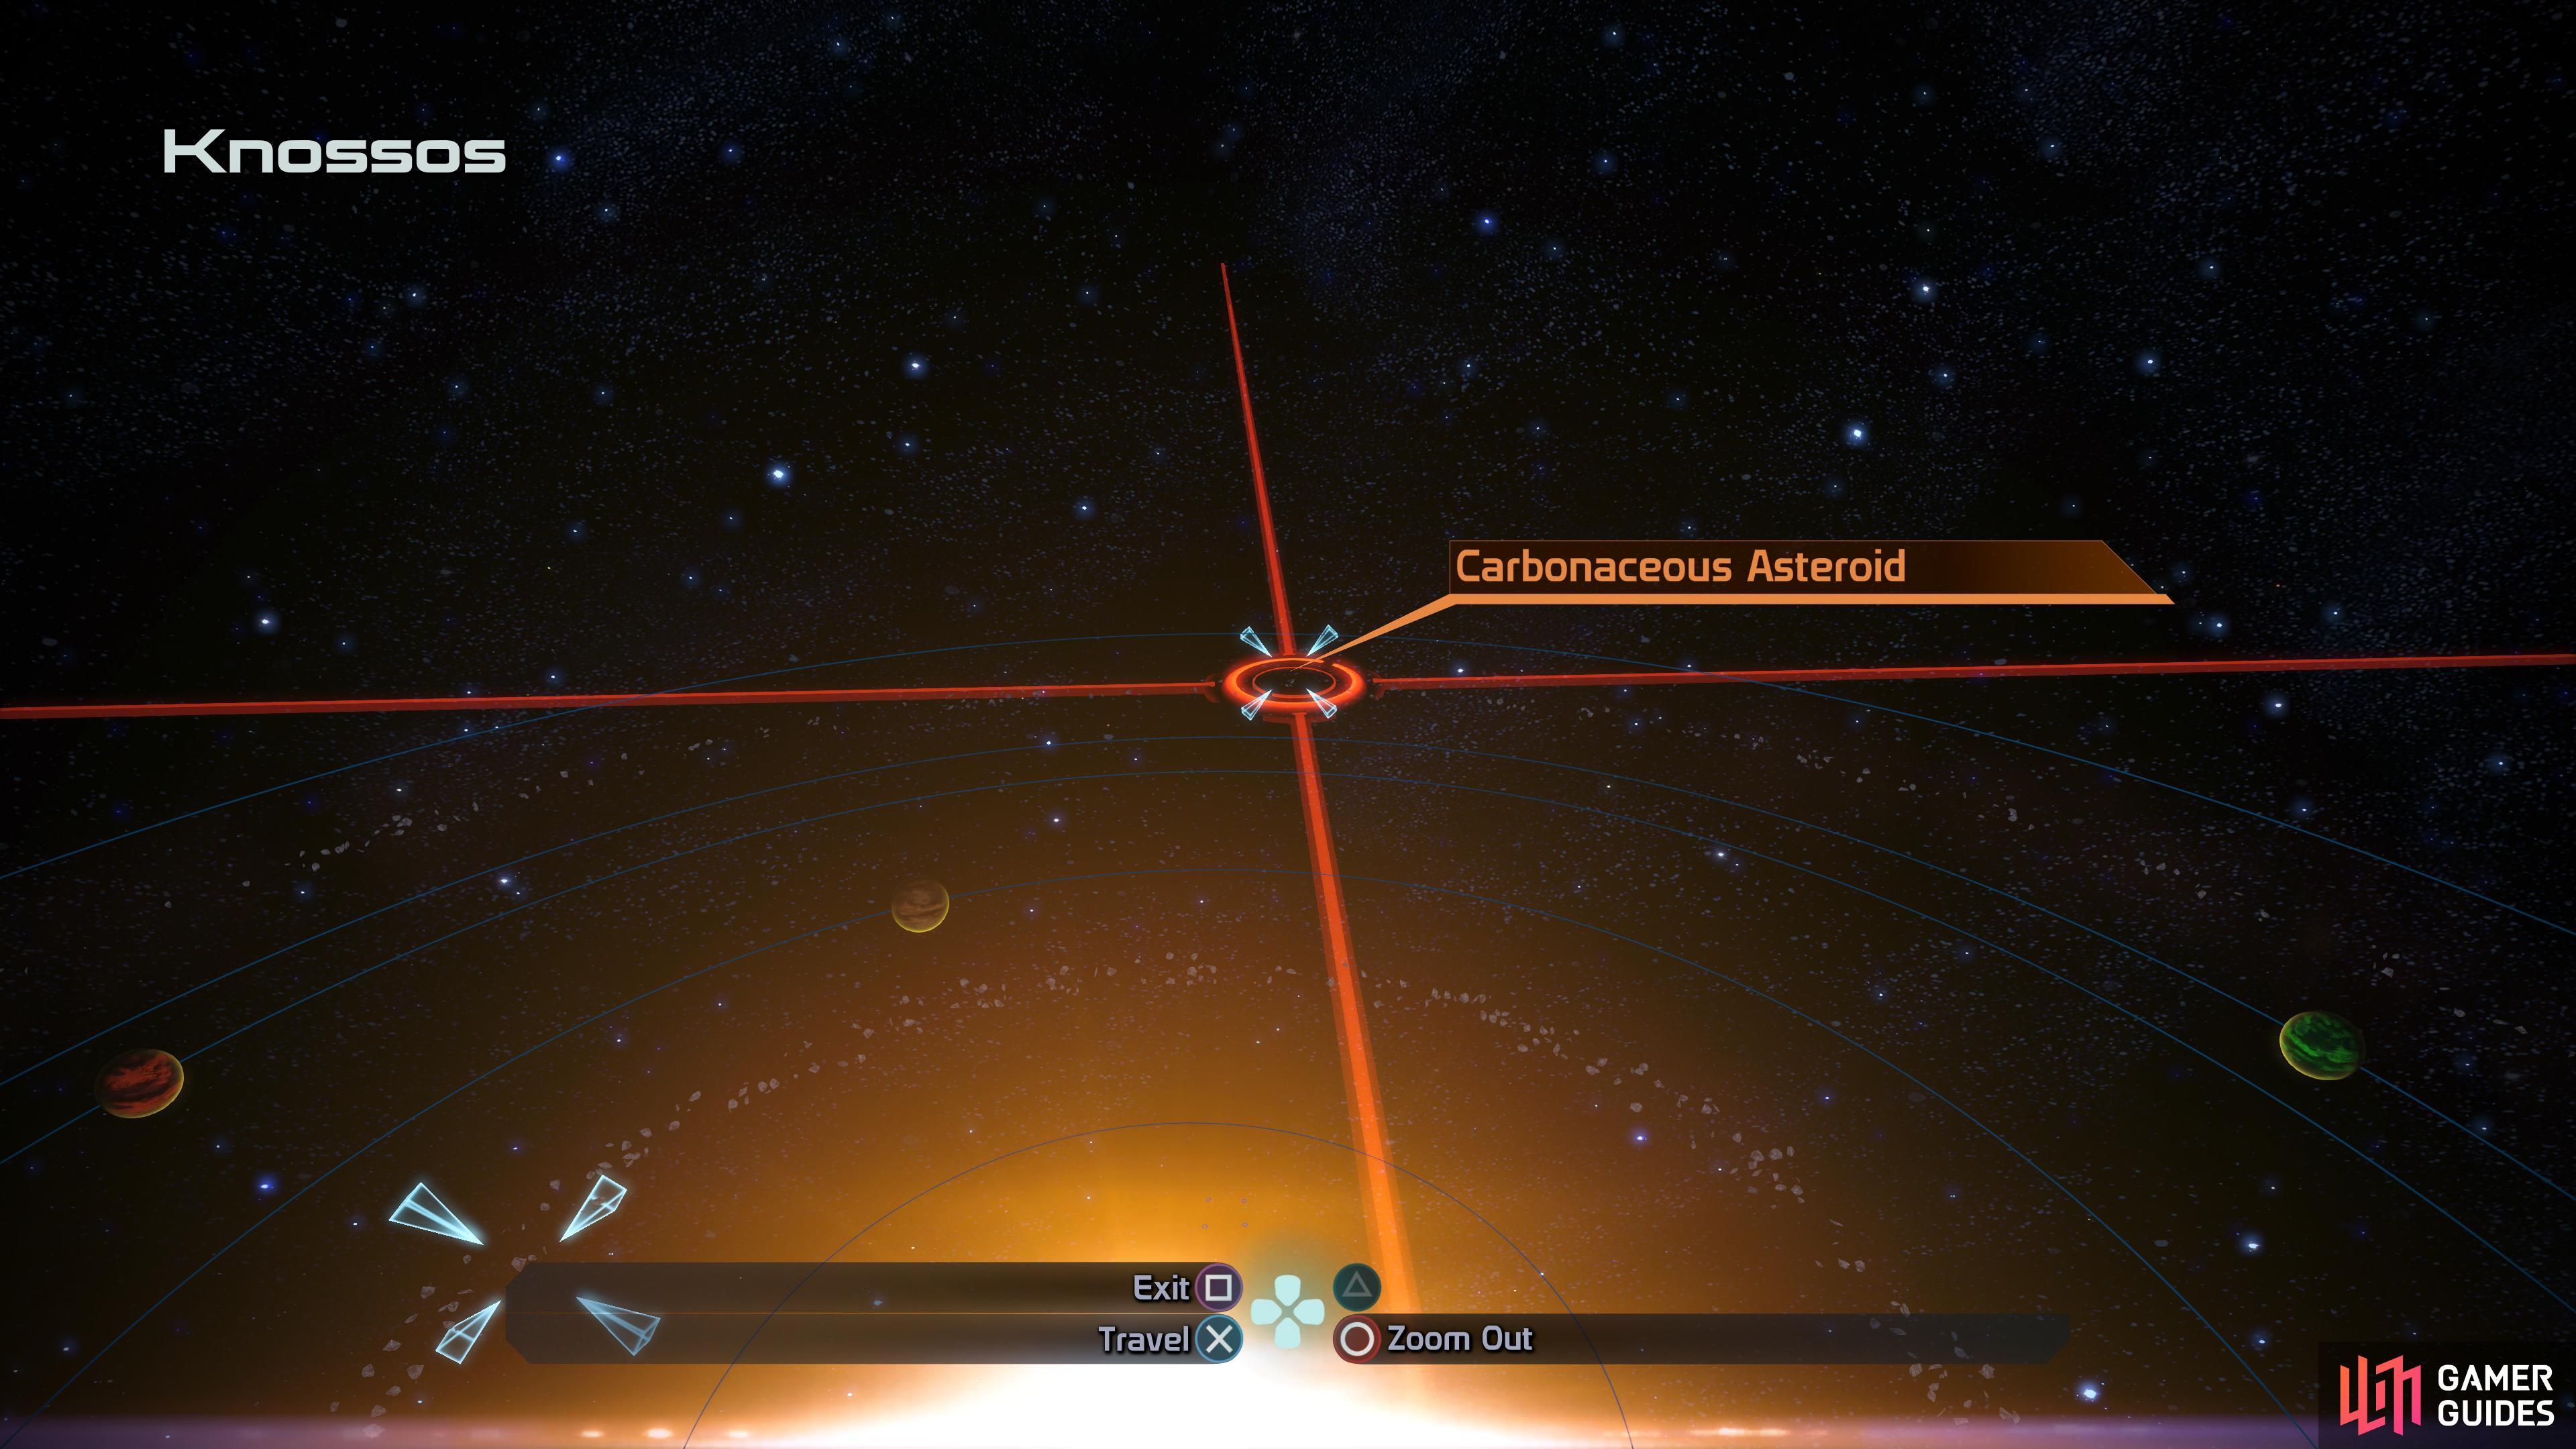 There are two asteroids you can scan in the Knossos system.